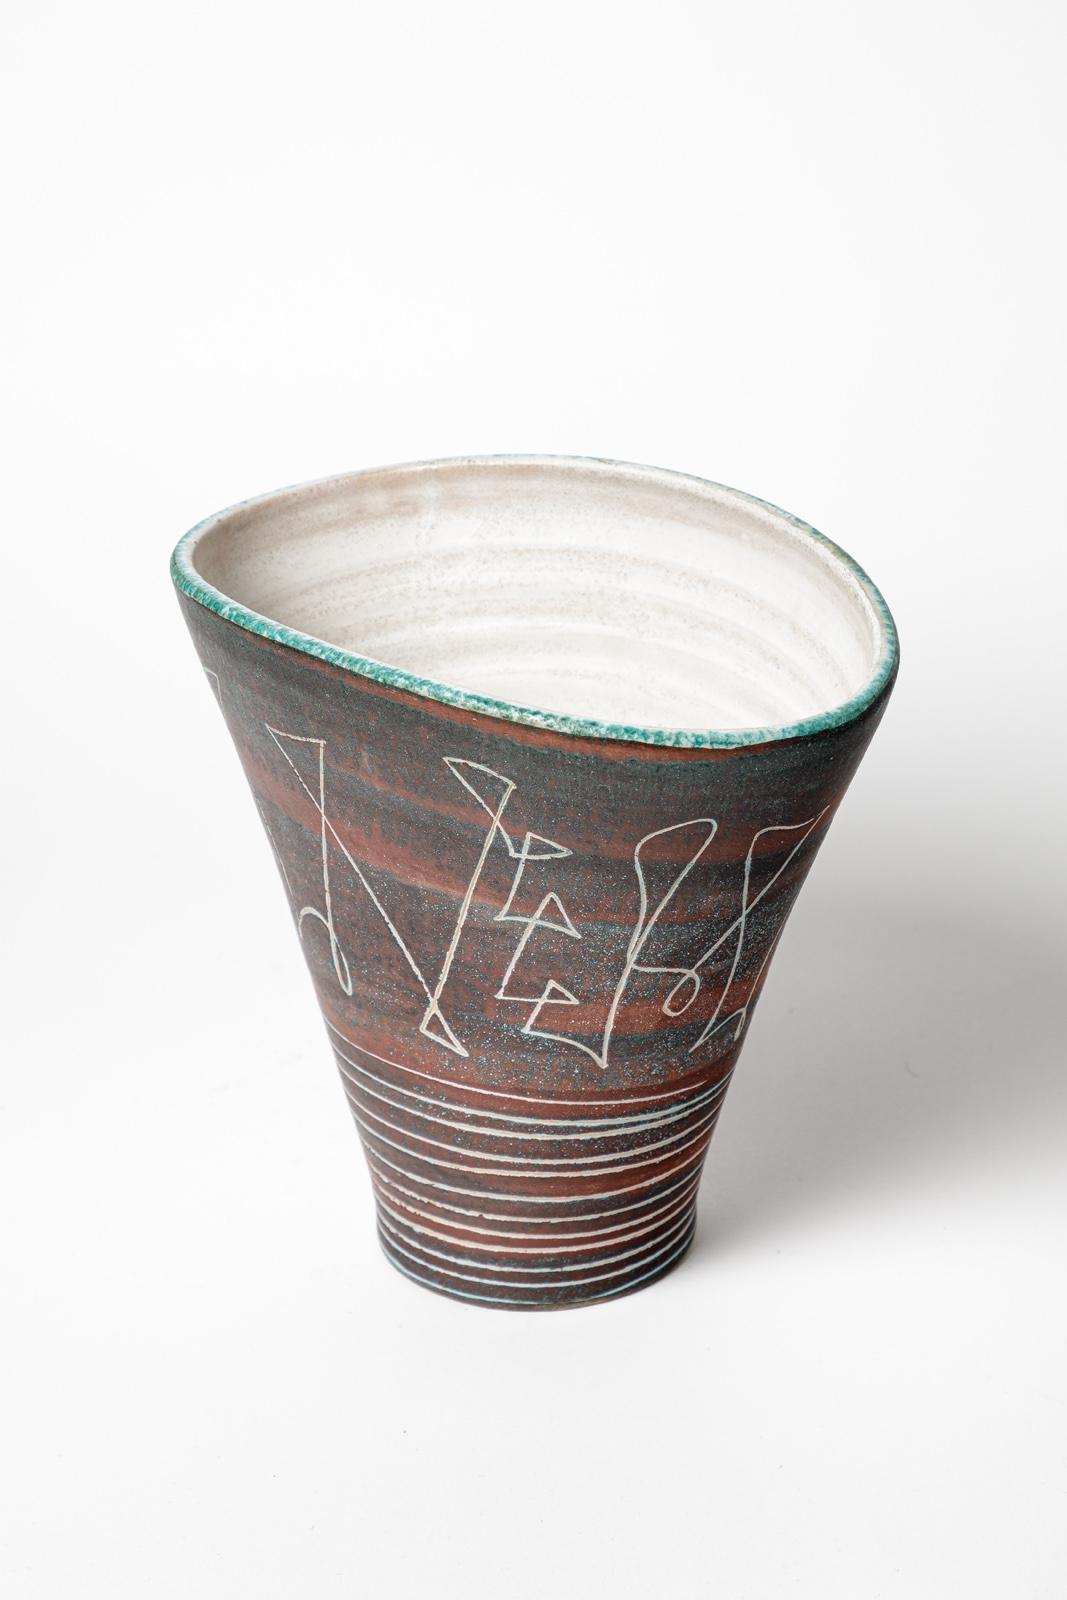 20th Century large abstract 20th century ceramic vase by Jean Austruy circa 1950 vallauris For Sale